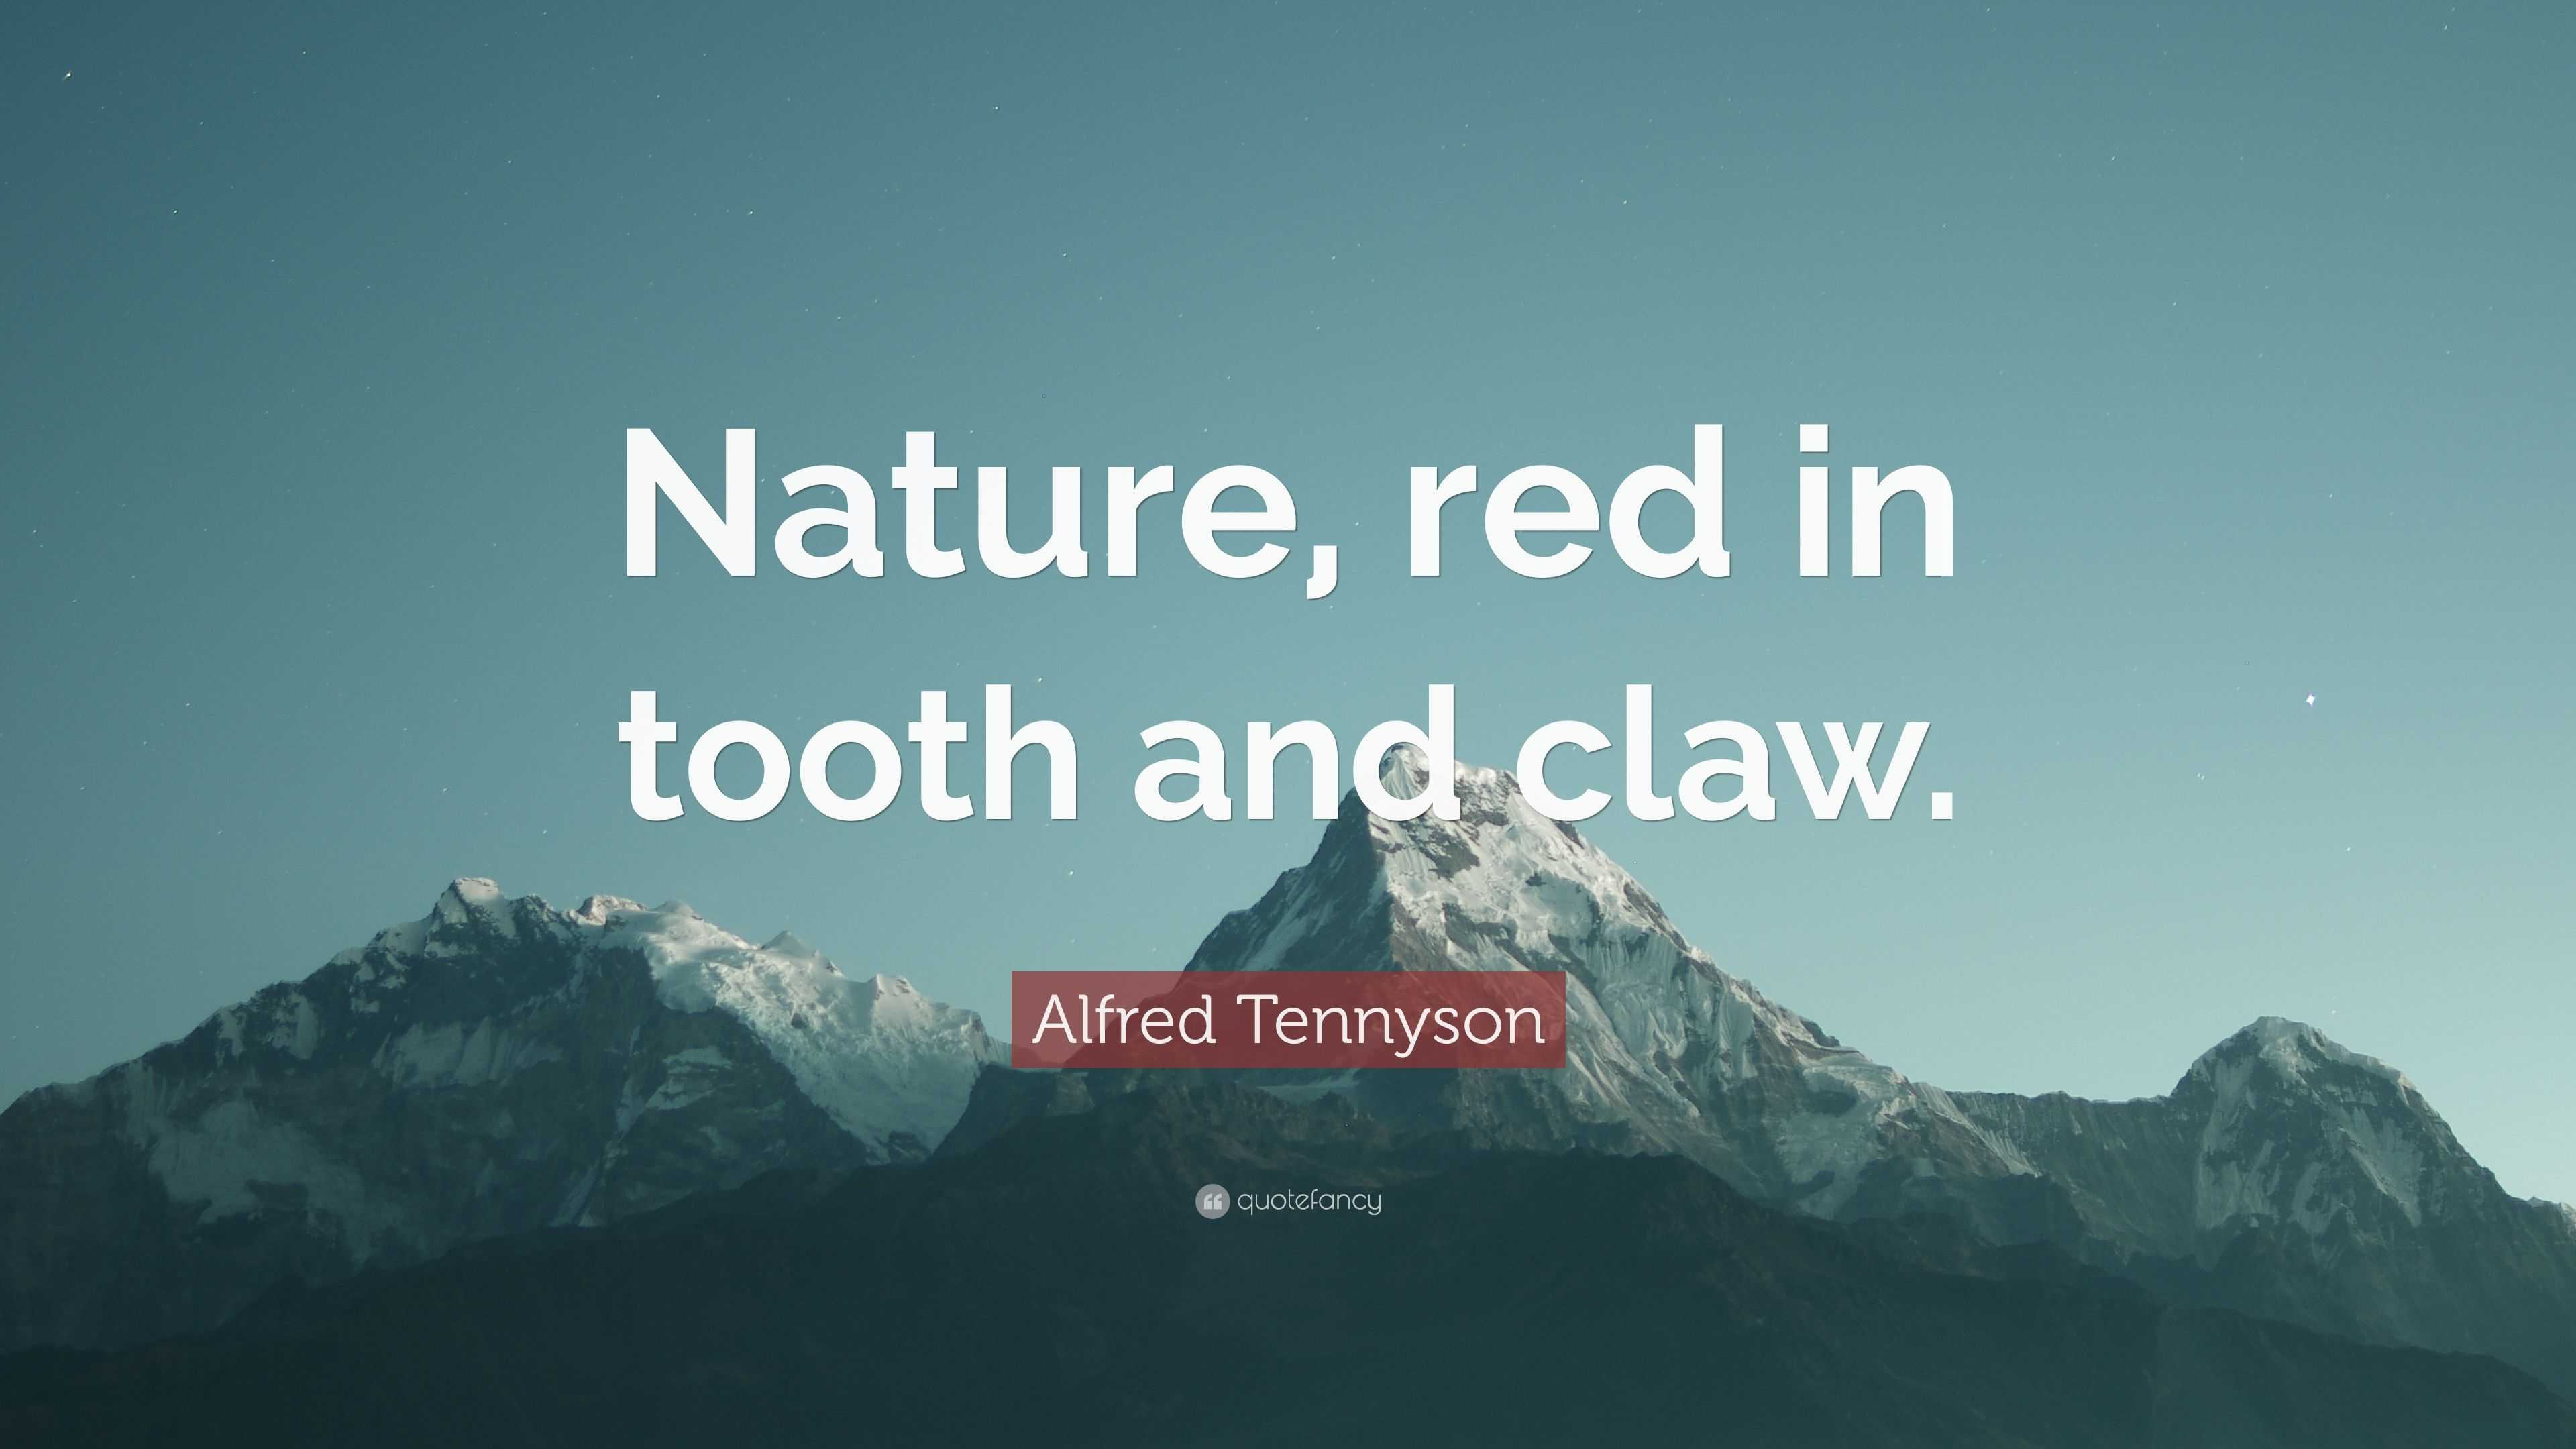 Alfred Tennyson Quote: “Nature, red in tooth and